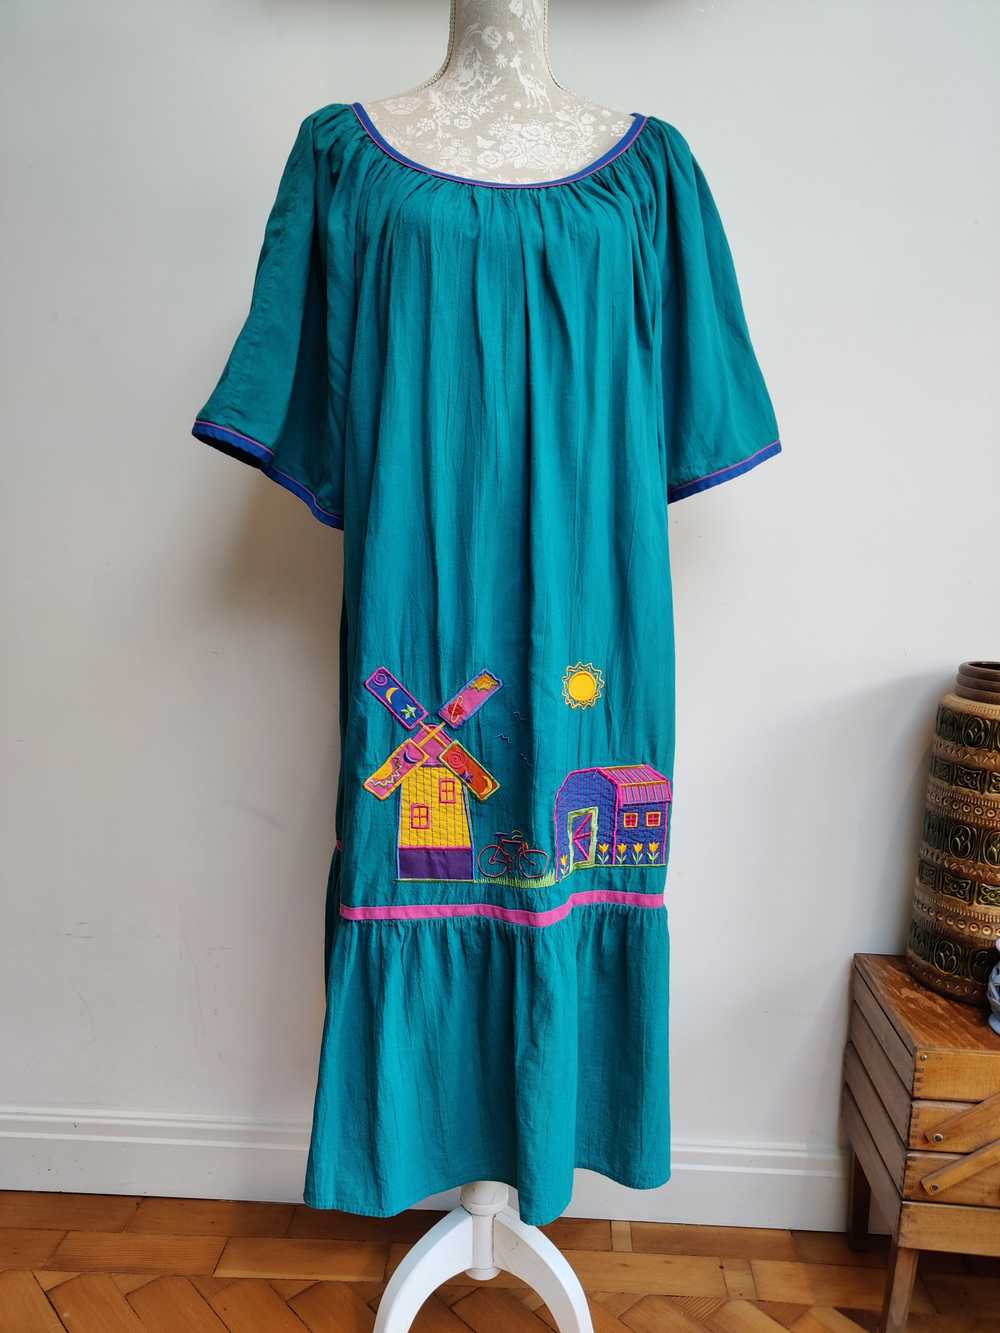 Stunning 80s Appel patio dress with novelty windm… - image 1